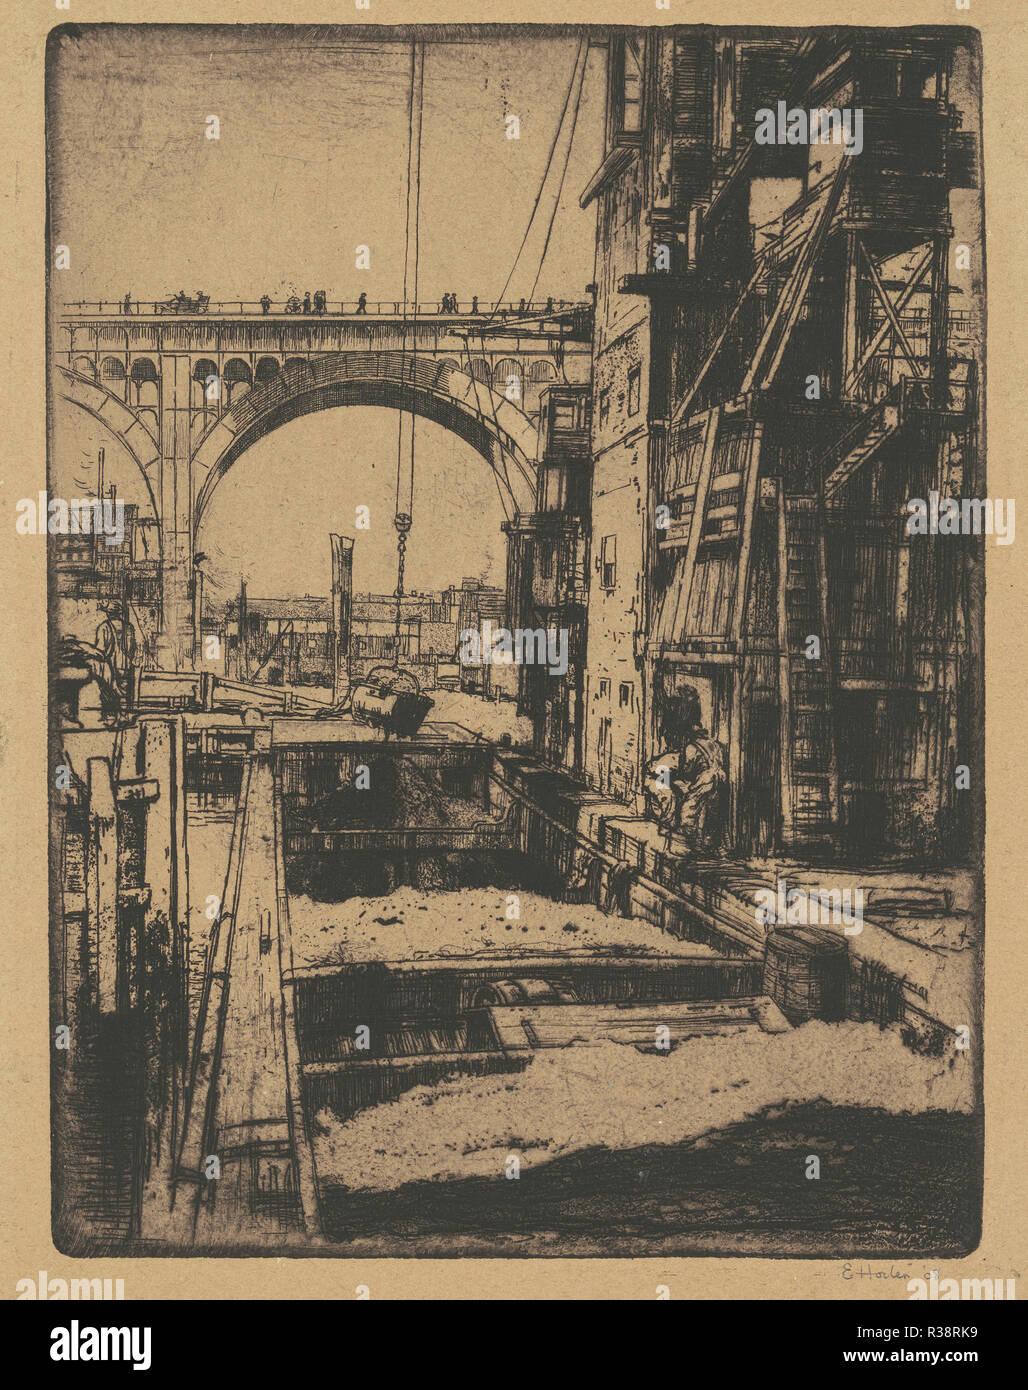 Viaduct, Coal Pockets. Dated: 1908. Dimensions: plate: 25.24 × 19.05 cm (9 15/16 × 7 1/2 in.)  sheet: 28.26 × 21.59 cm (11 1/8 × 8 1/2 in.). Medium: etching in black on wove paper. Museum: National Gallery of Art, Washington DC. Author: Earl Horter. Stock Photo